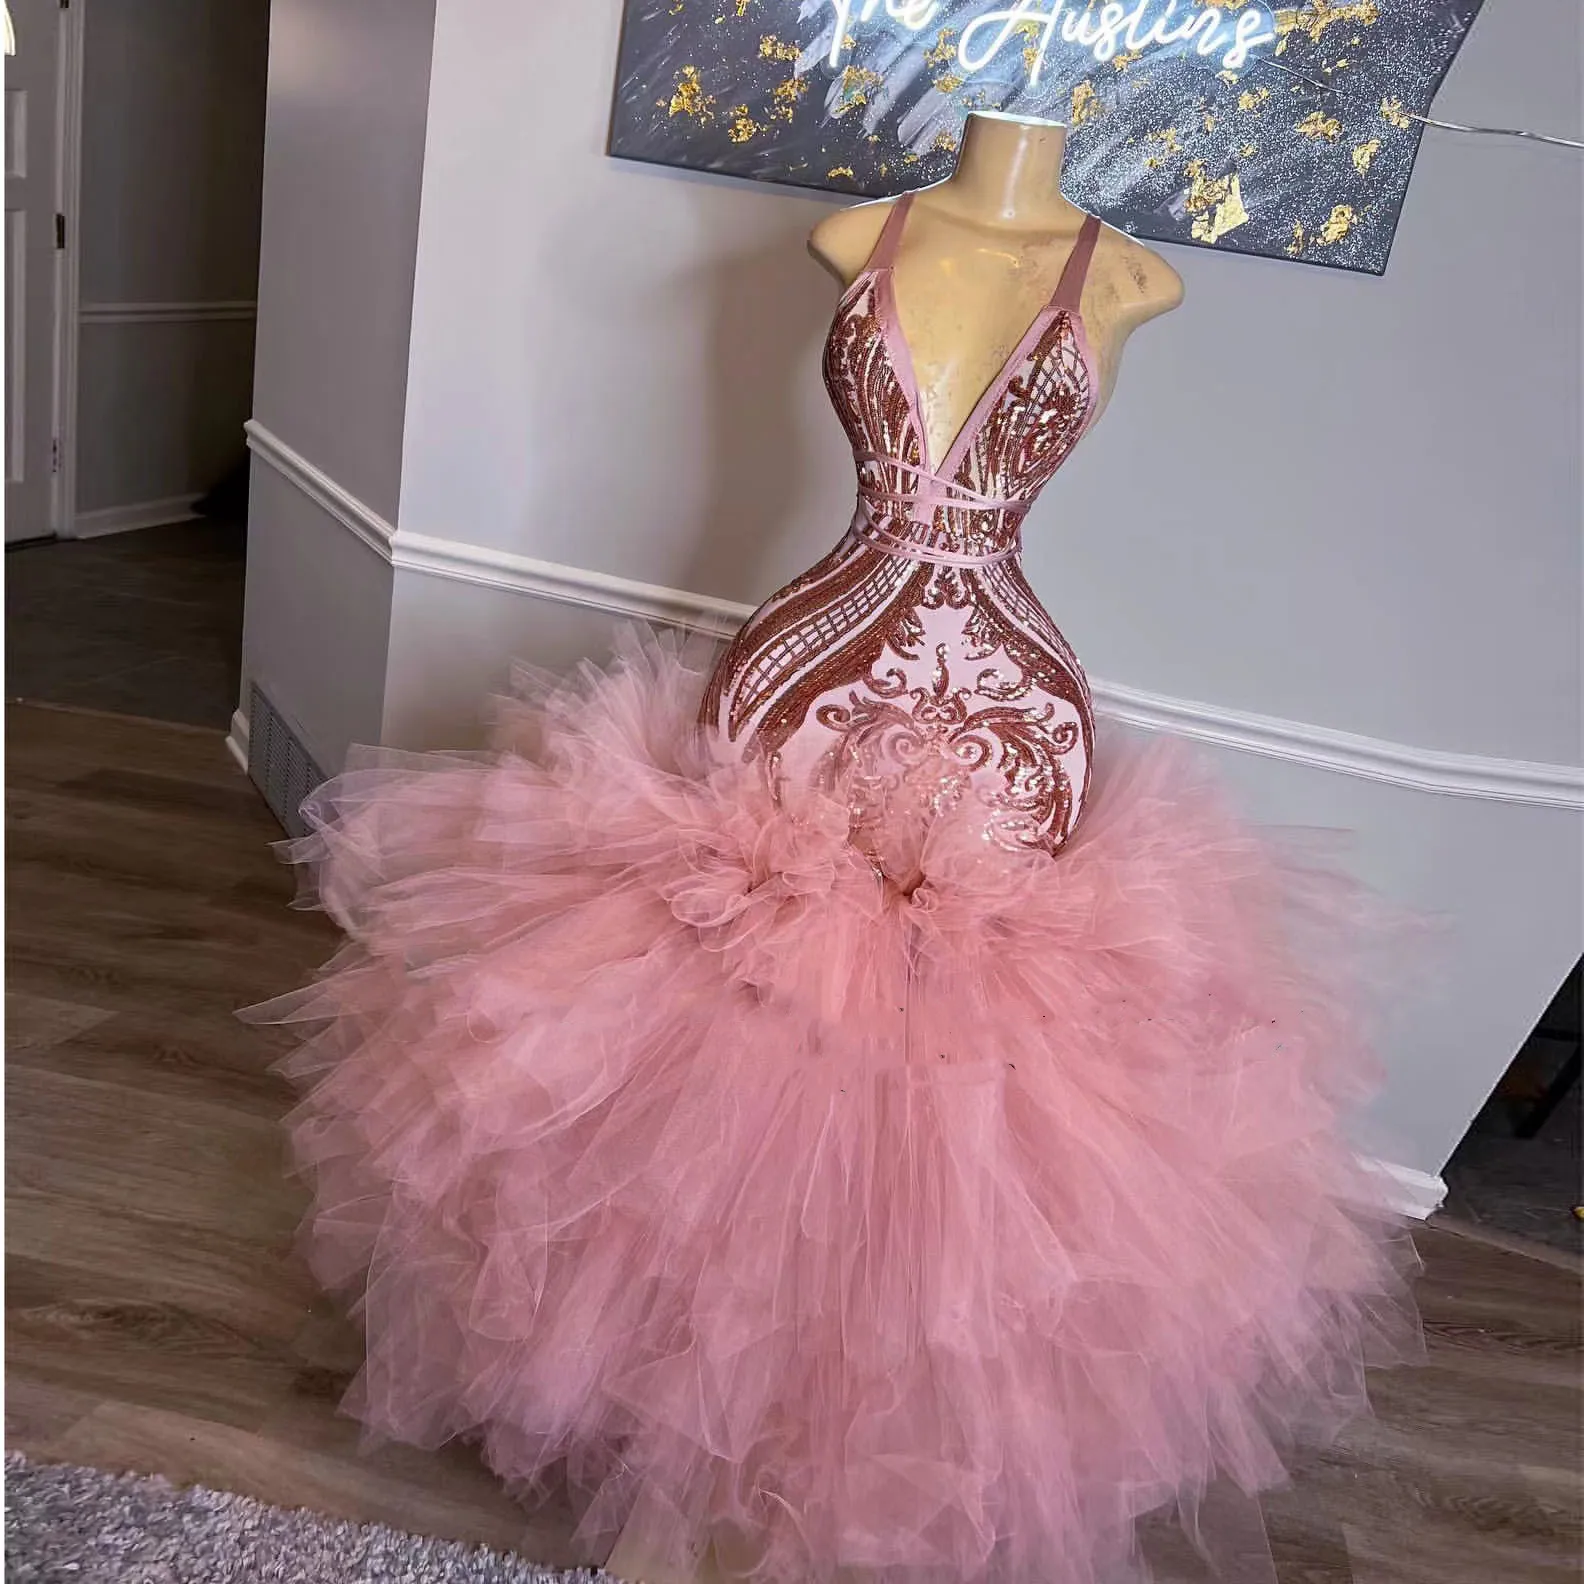 

Charming Pink Black Girls Sparkly Sequined Prom Dress Women Halter Birthday Long Evening Party Dress Sweetheart Graduation Gown